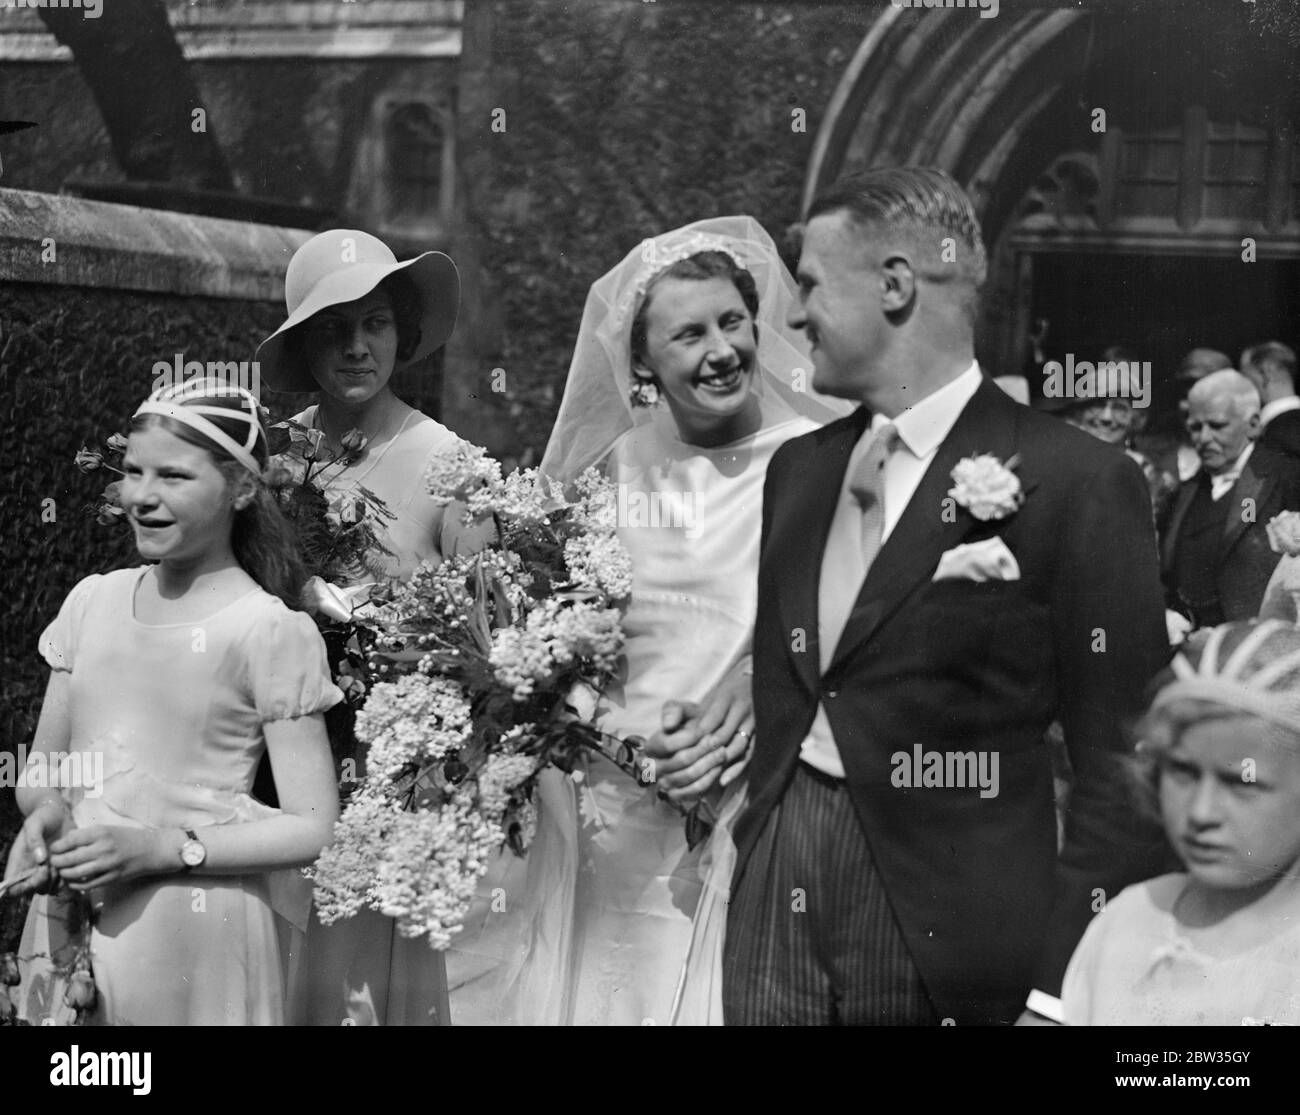 Dr J S Knox Weds Miss Norwood East at city church . The marriage between Dr John Stuart Knox and Miss Joan Norwood East took place at the Priory Church , St Bartholomew the Great , E C . The bride and groom after the ceremony . 27 April 1933 Stock Photo